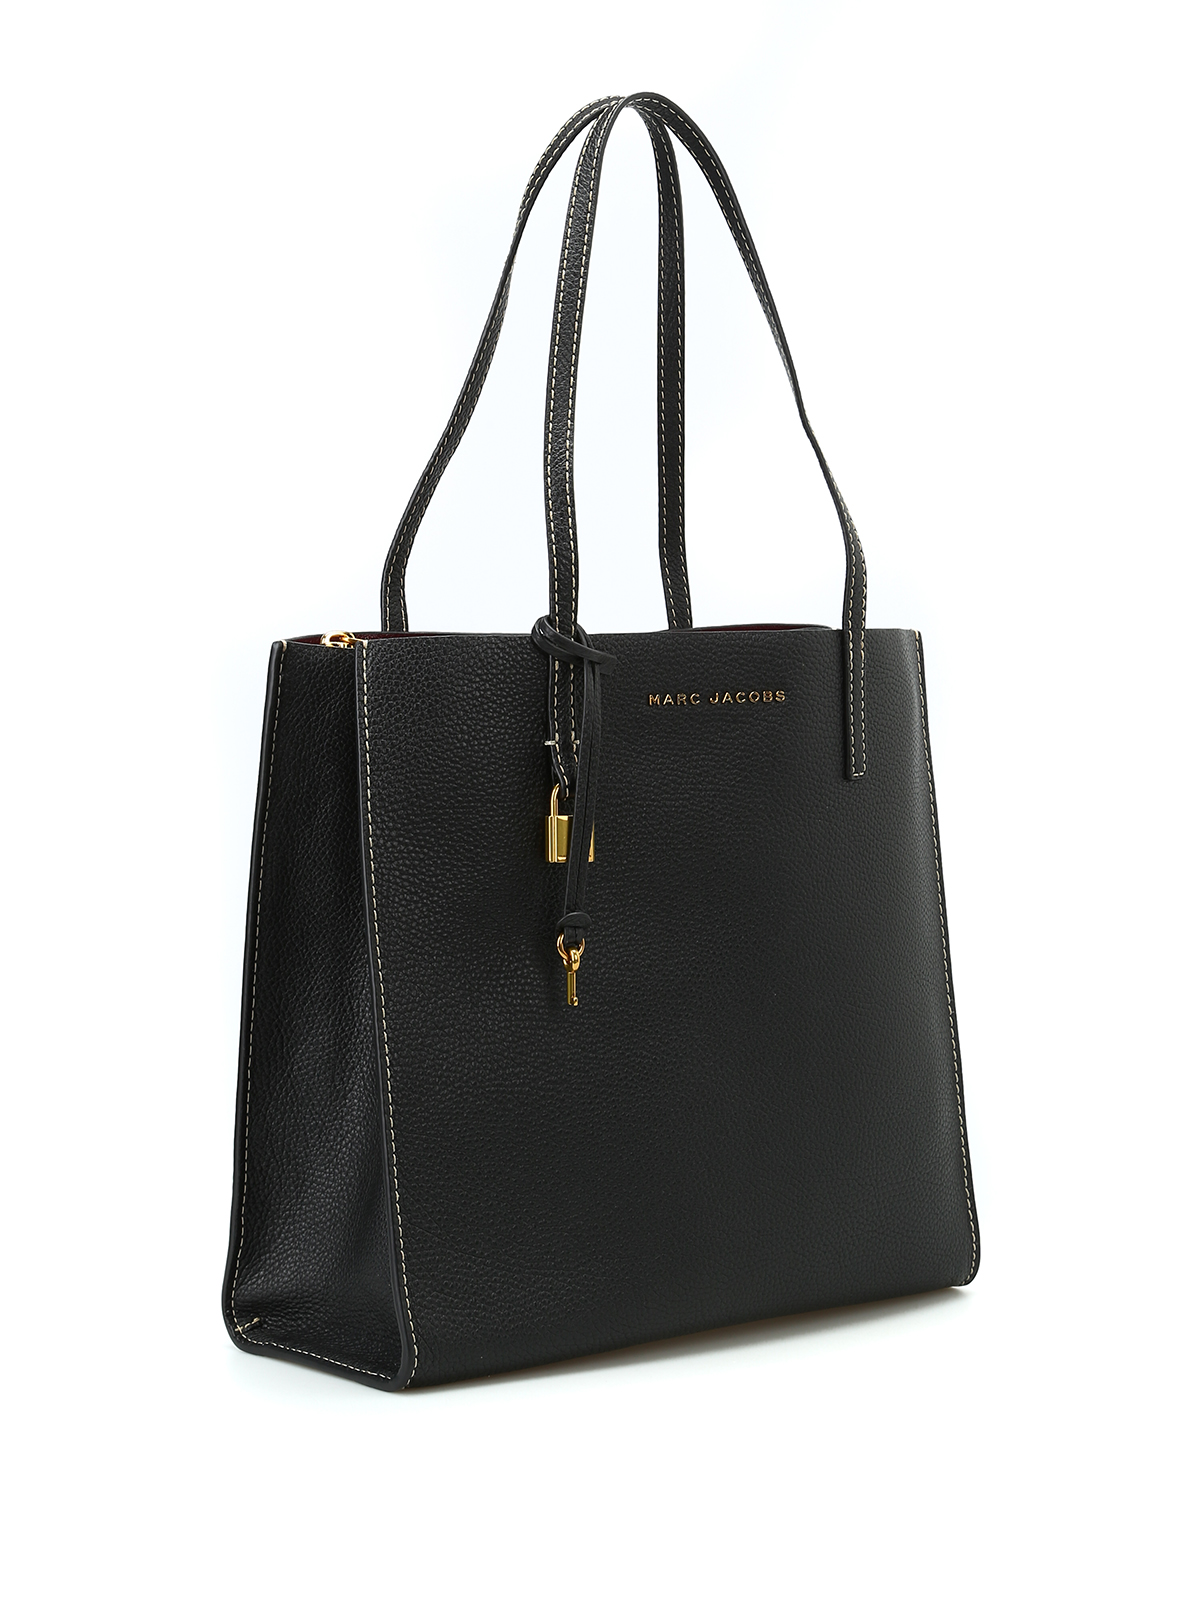 Totes bags Marc Jacobs - Grind black pebble leather tote - M0012669065